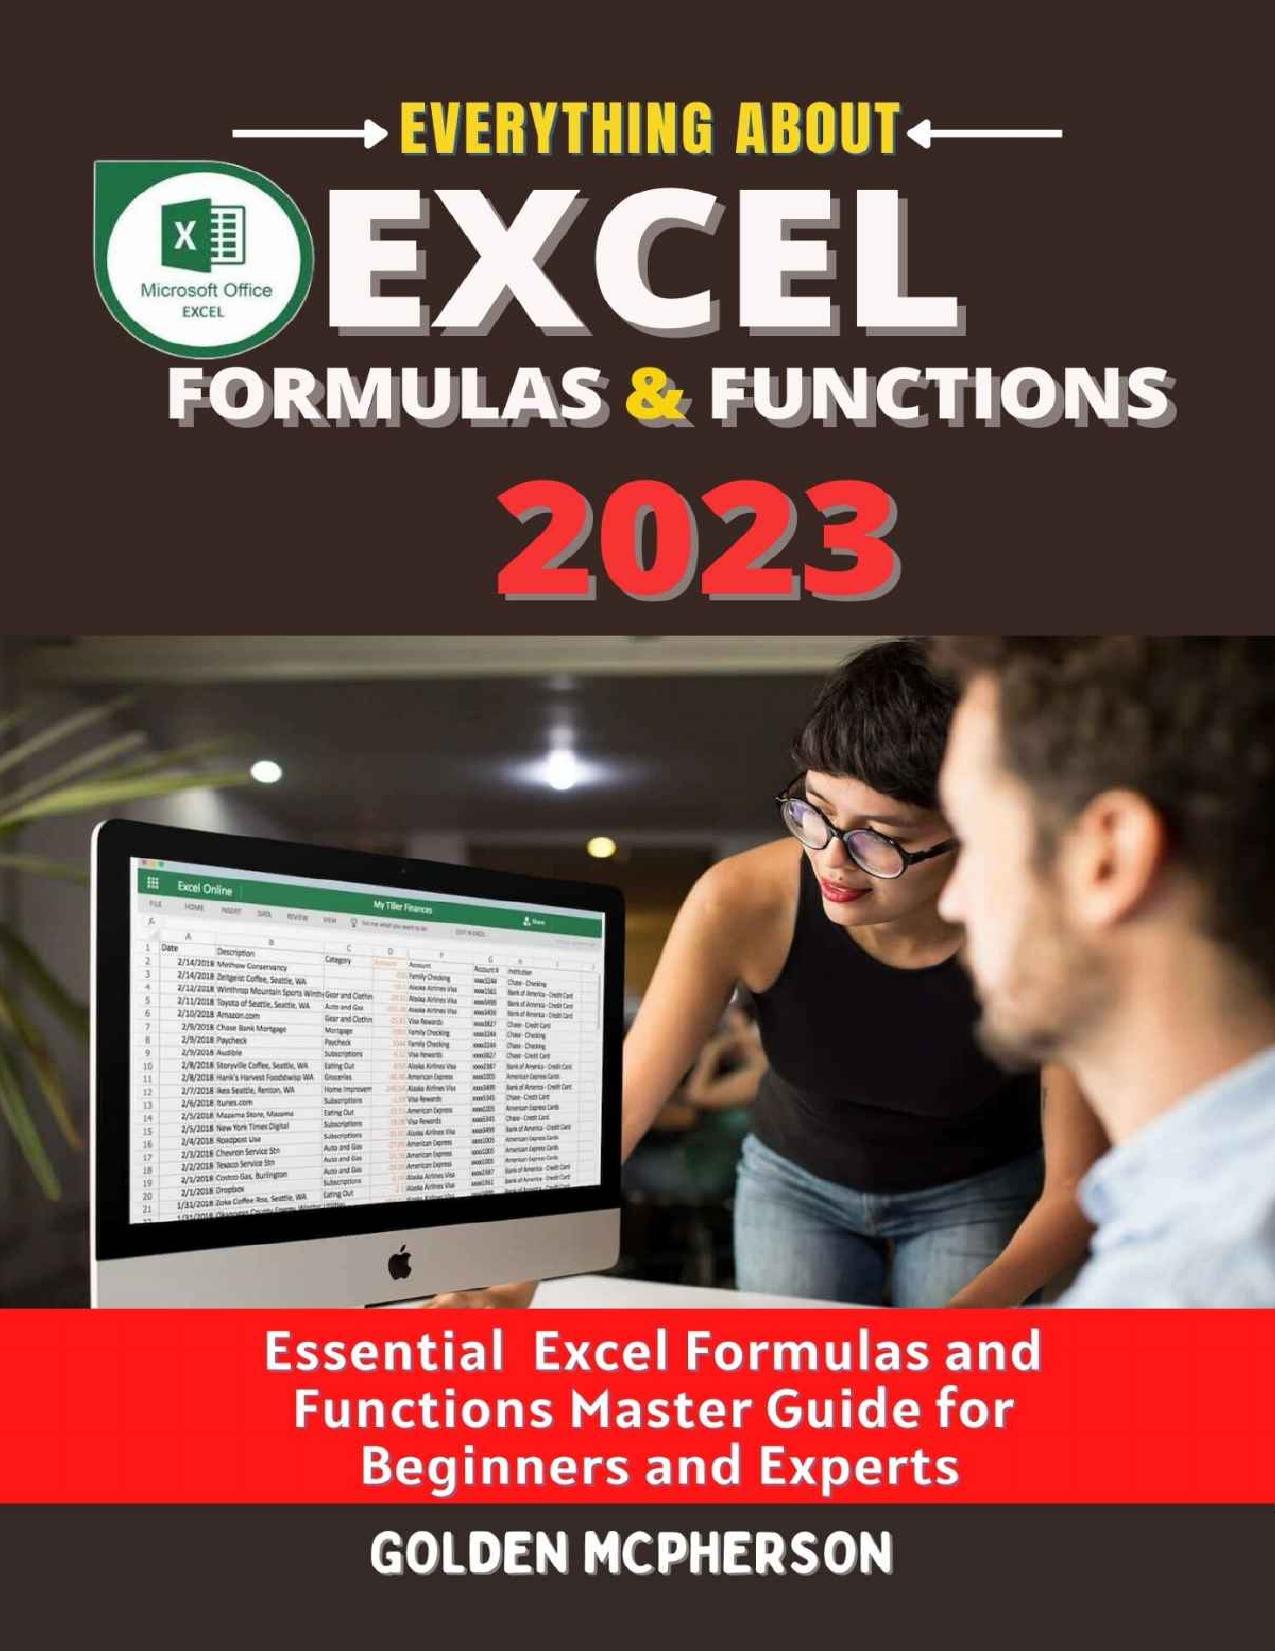 EXCEL FORMULAS & FUNCTIONS 2023 by MCPHERSON GOLDEN